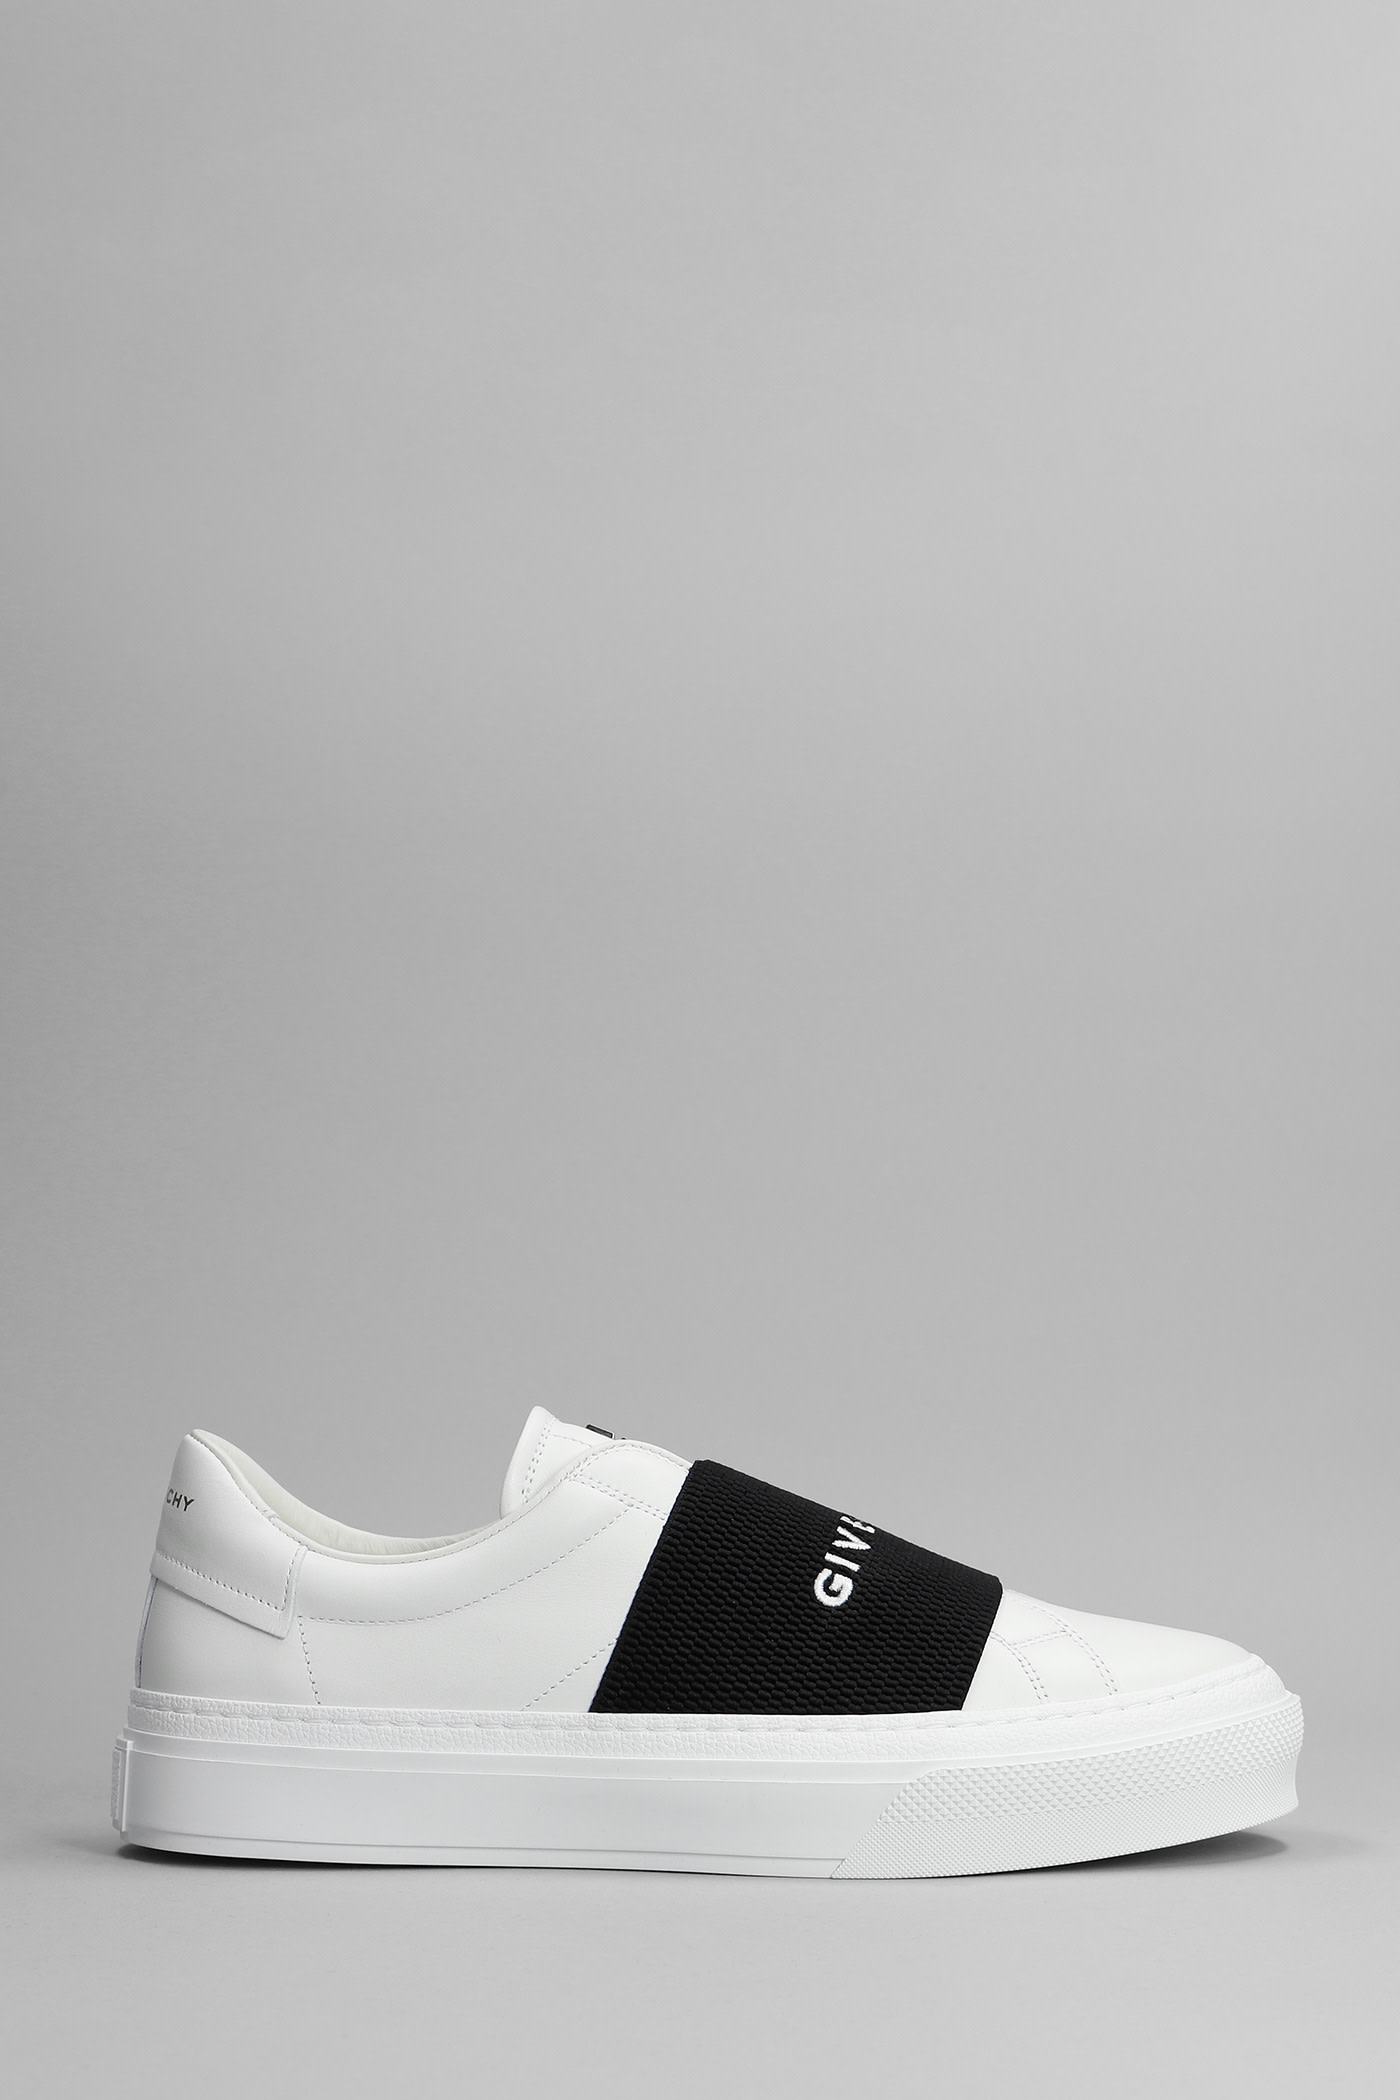 Givenchy City Court Sneakers In White Leather